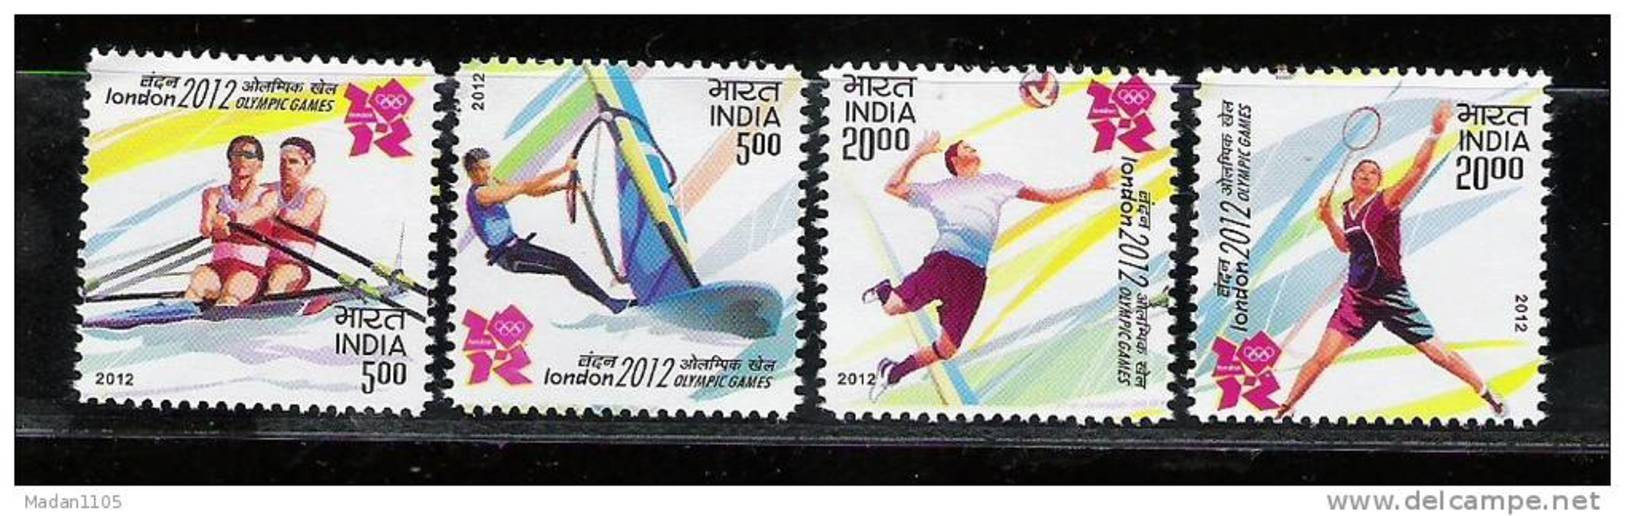 INDIA 2012  Olympic Games, LOT Of 10 Sets, Olympics, London . Sets Of 4 Stamps, MNH(**) - Verano 2012: Londres